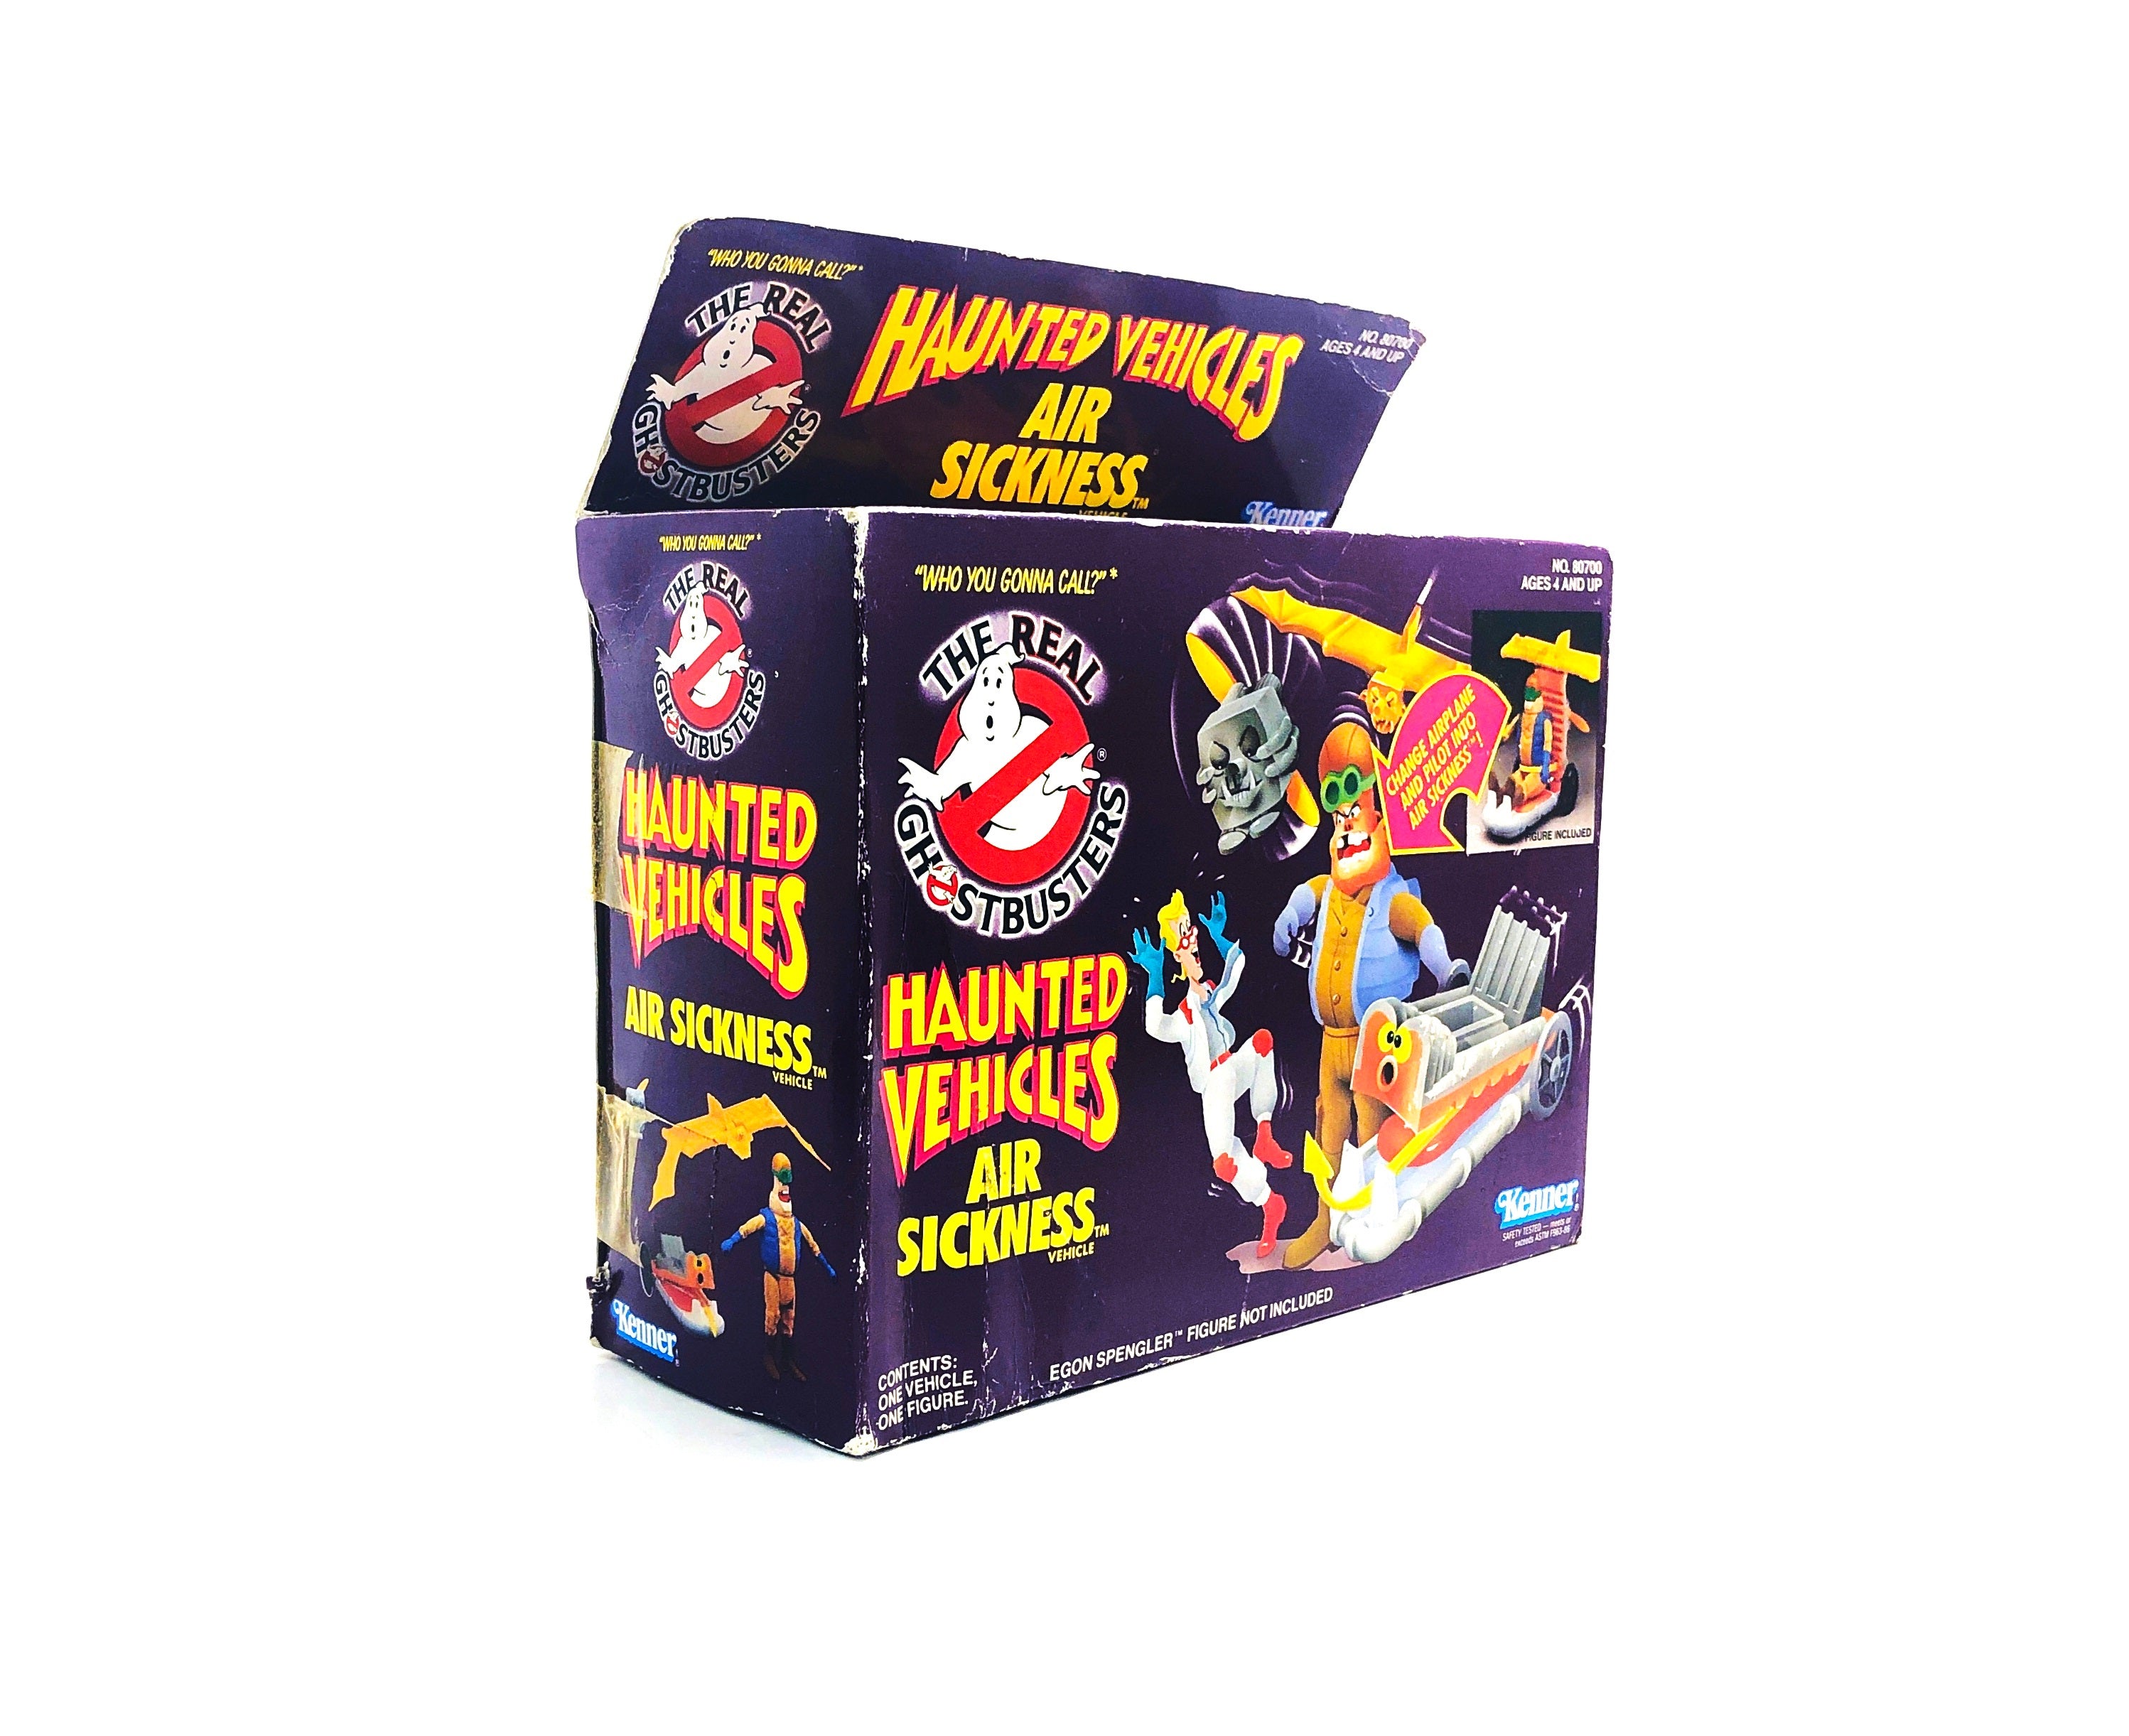 The Real Ghostbusters Haunted Vehicle Air Sickness (Kenner, 1986)